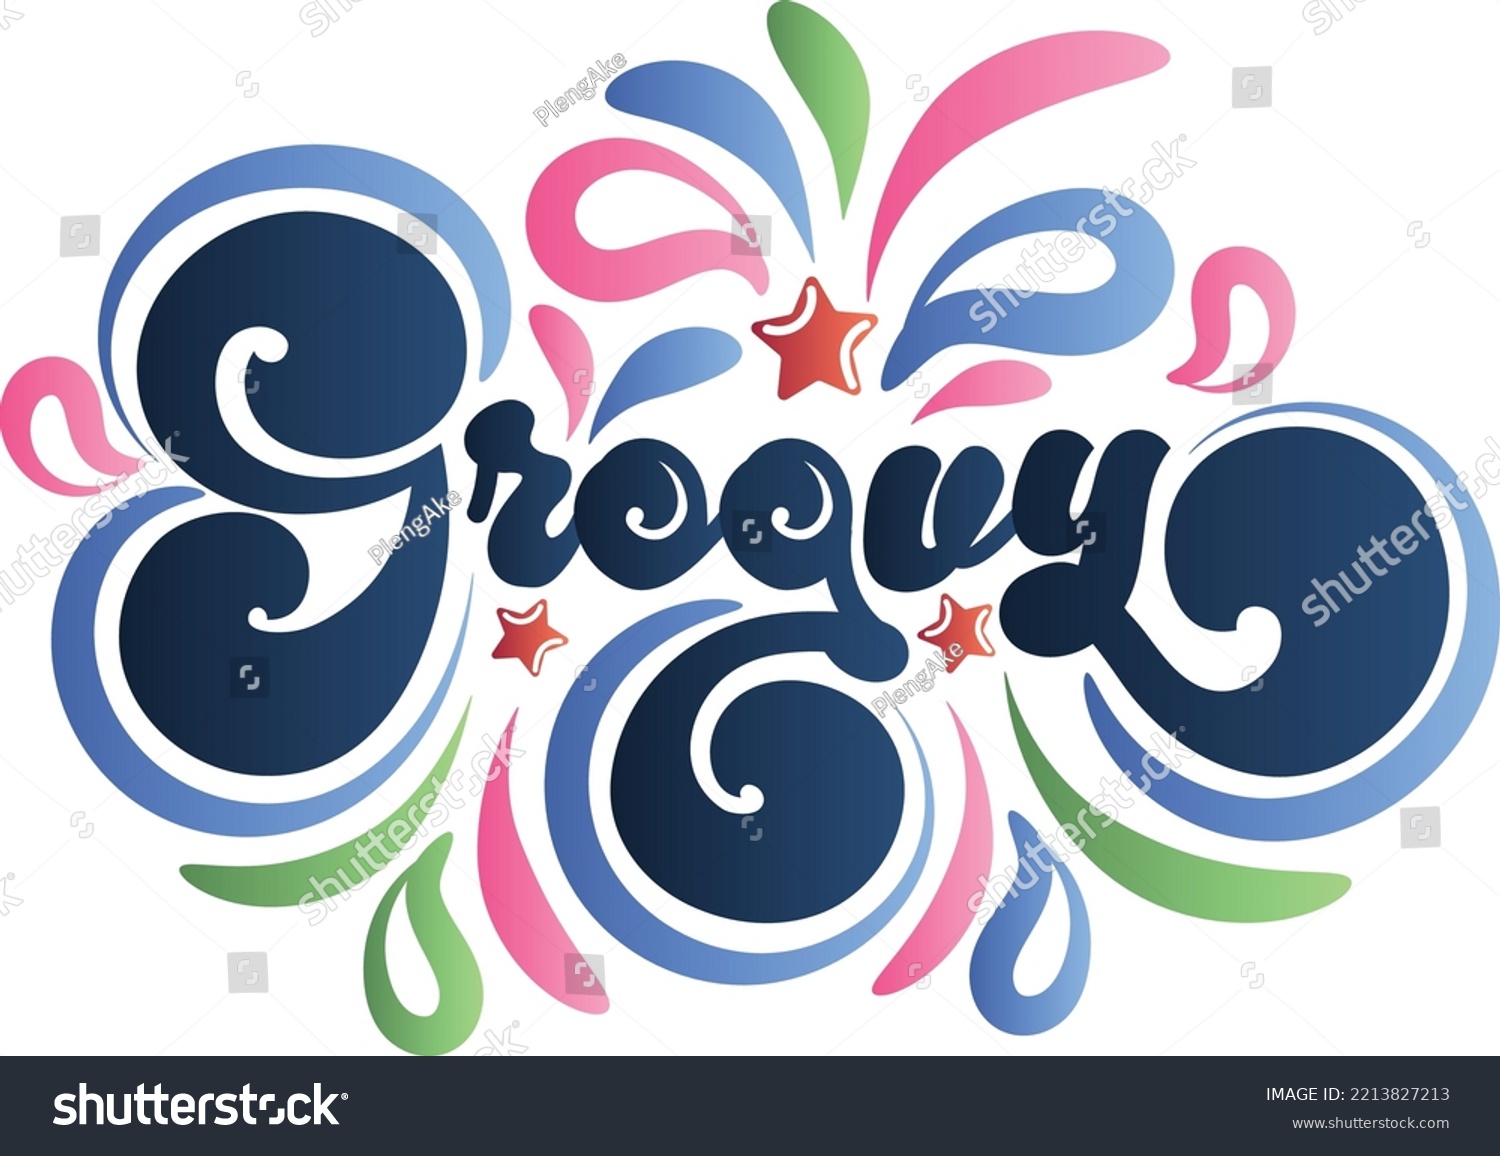 SVG of Groovy lettering is vintage retro style combine with modern splashing water, the design Calligraphy letter has a unique and beautiful touch, which will make your product come alive!  svg